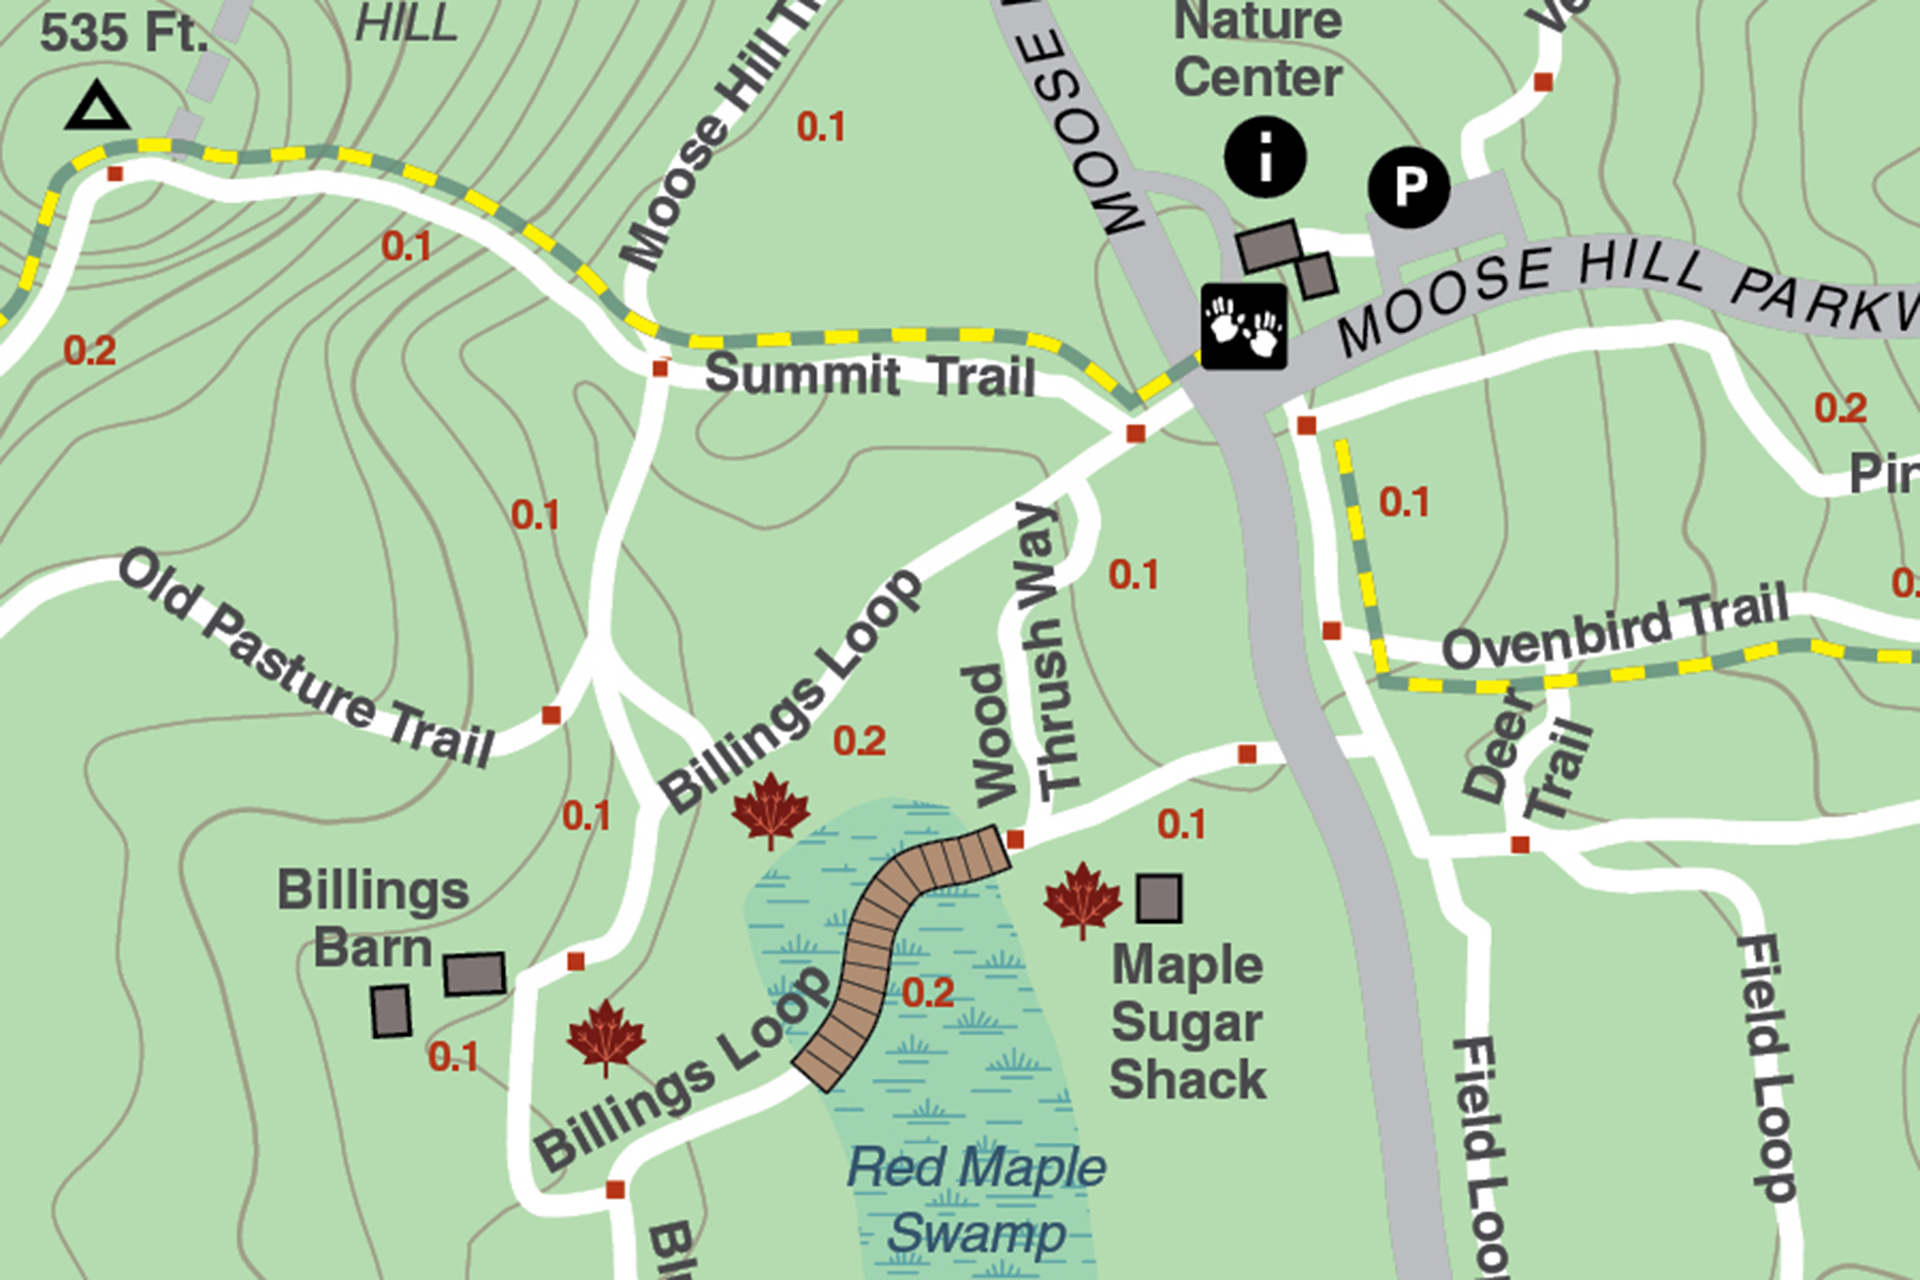 Isolated section of Moose Hill's trail map - with the Billings Loop and Maple Sugar shack highlighted by maple leaf icons, close to the center